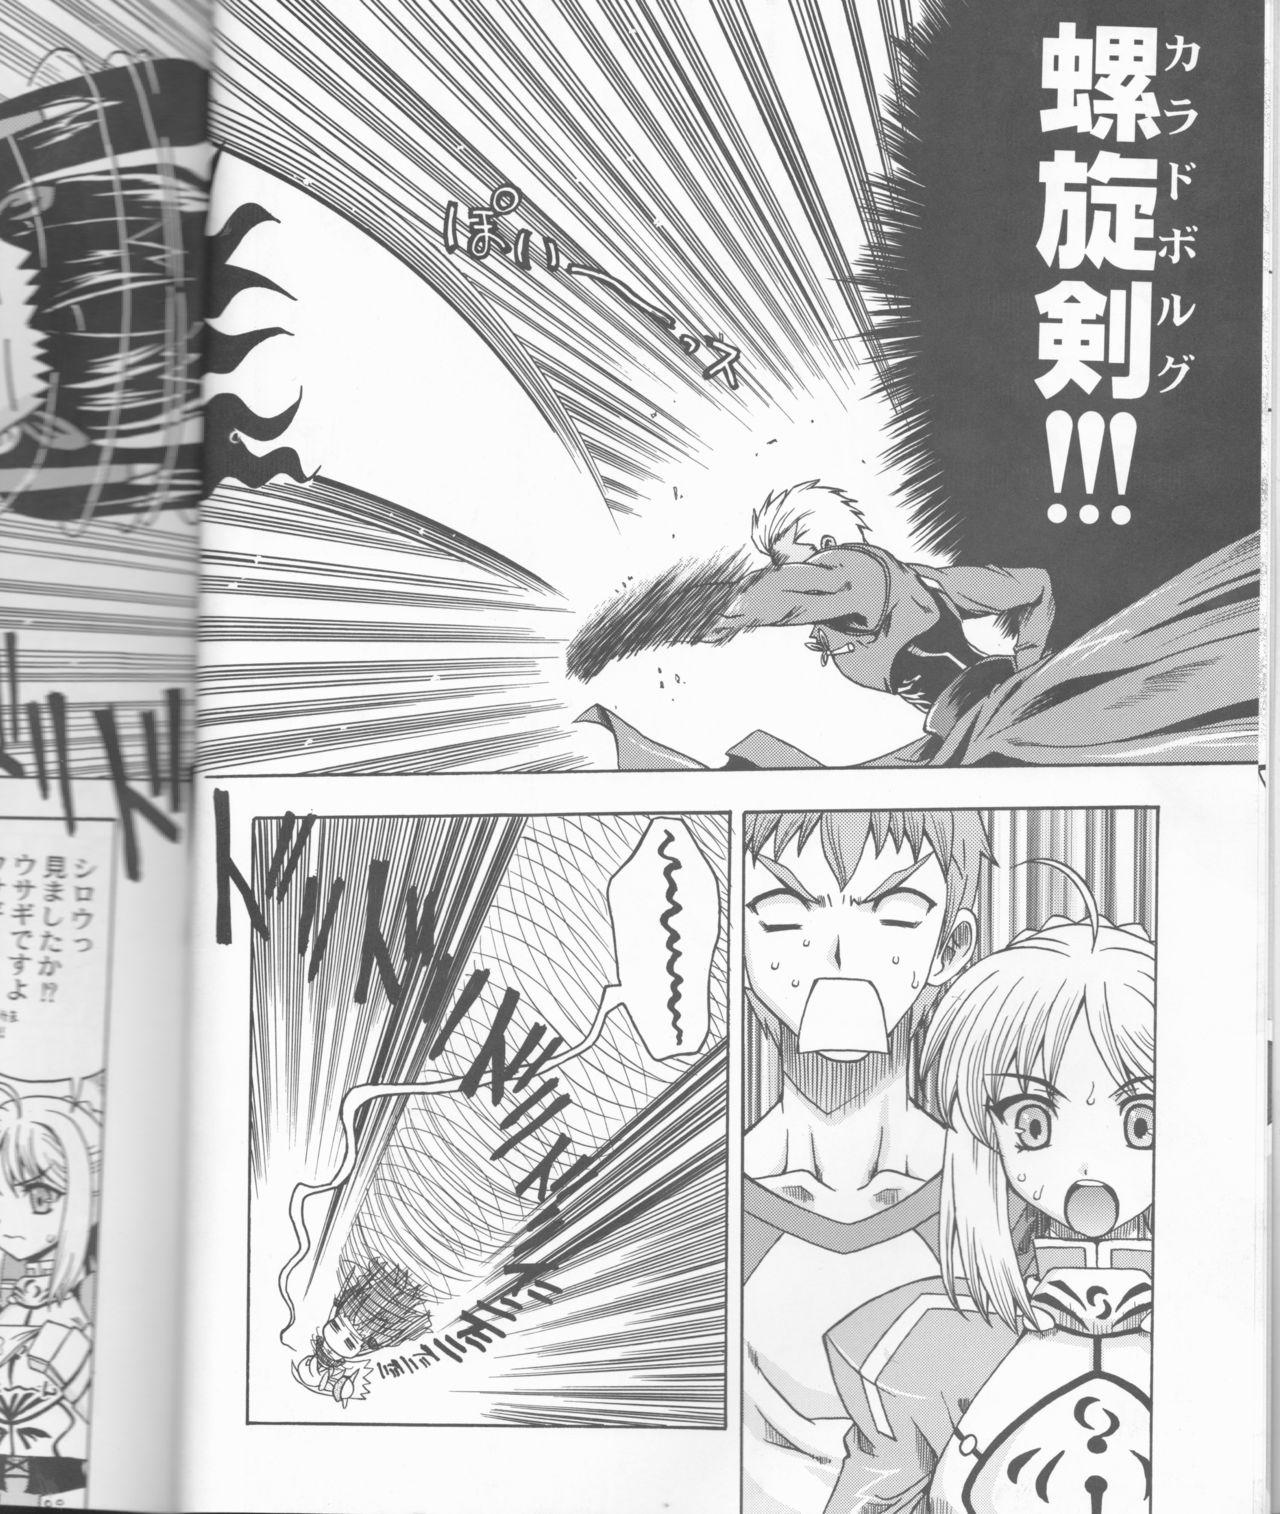 Fat Ass Going My Way - Fate stay night Stepsis - Page 9